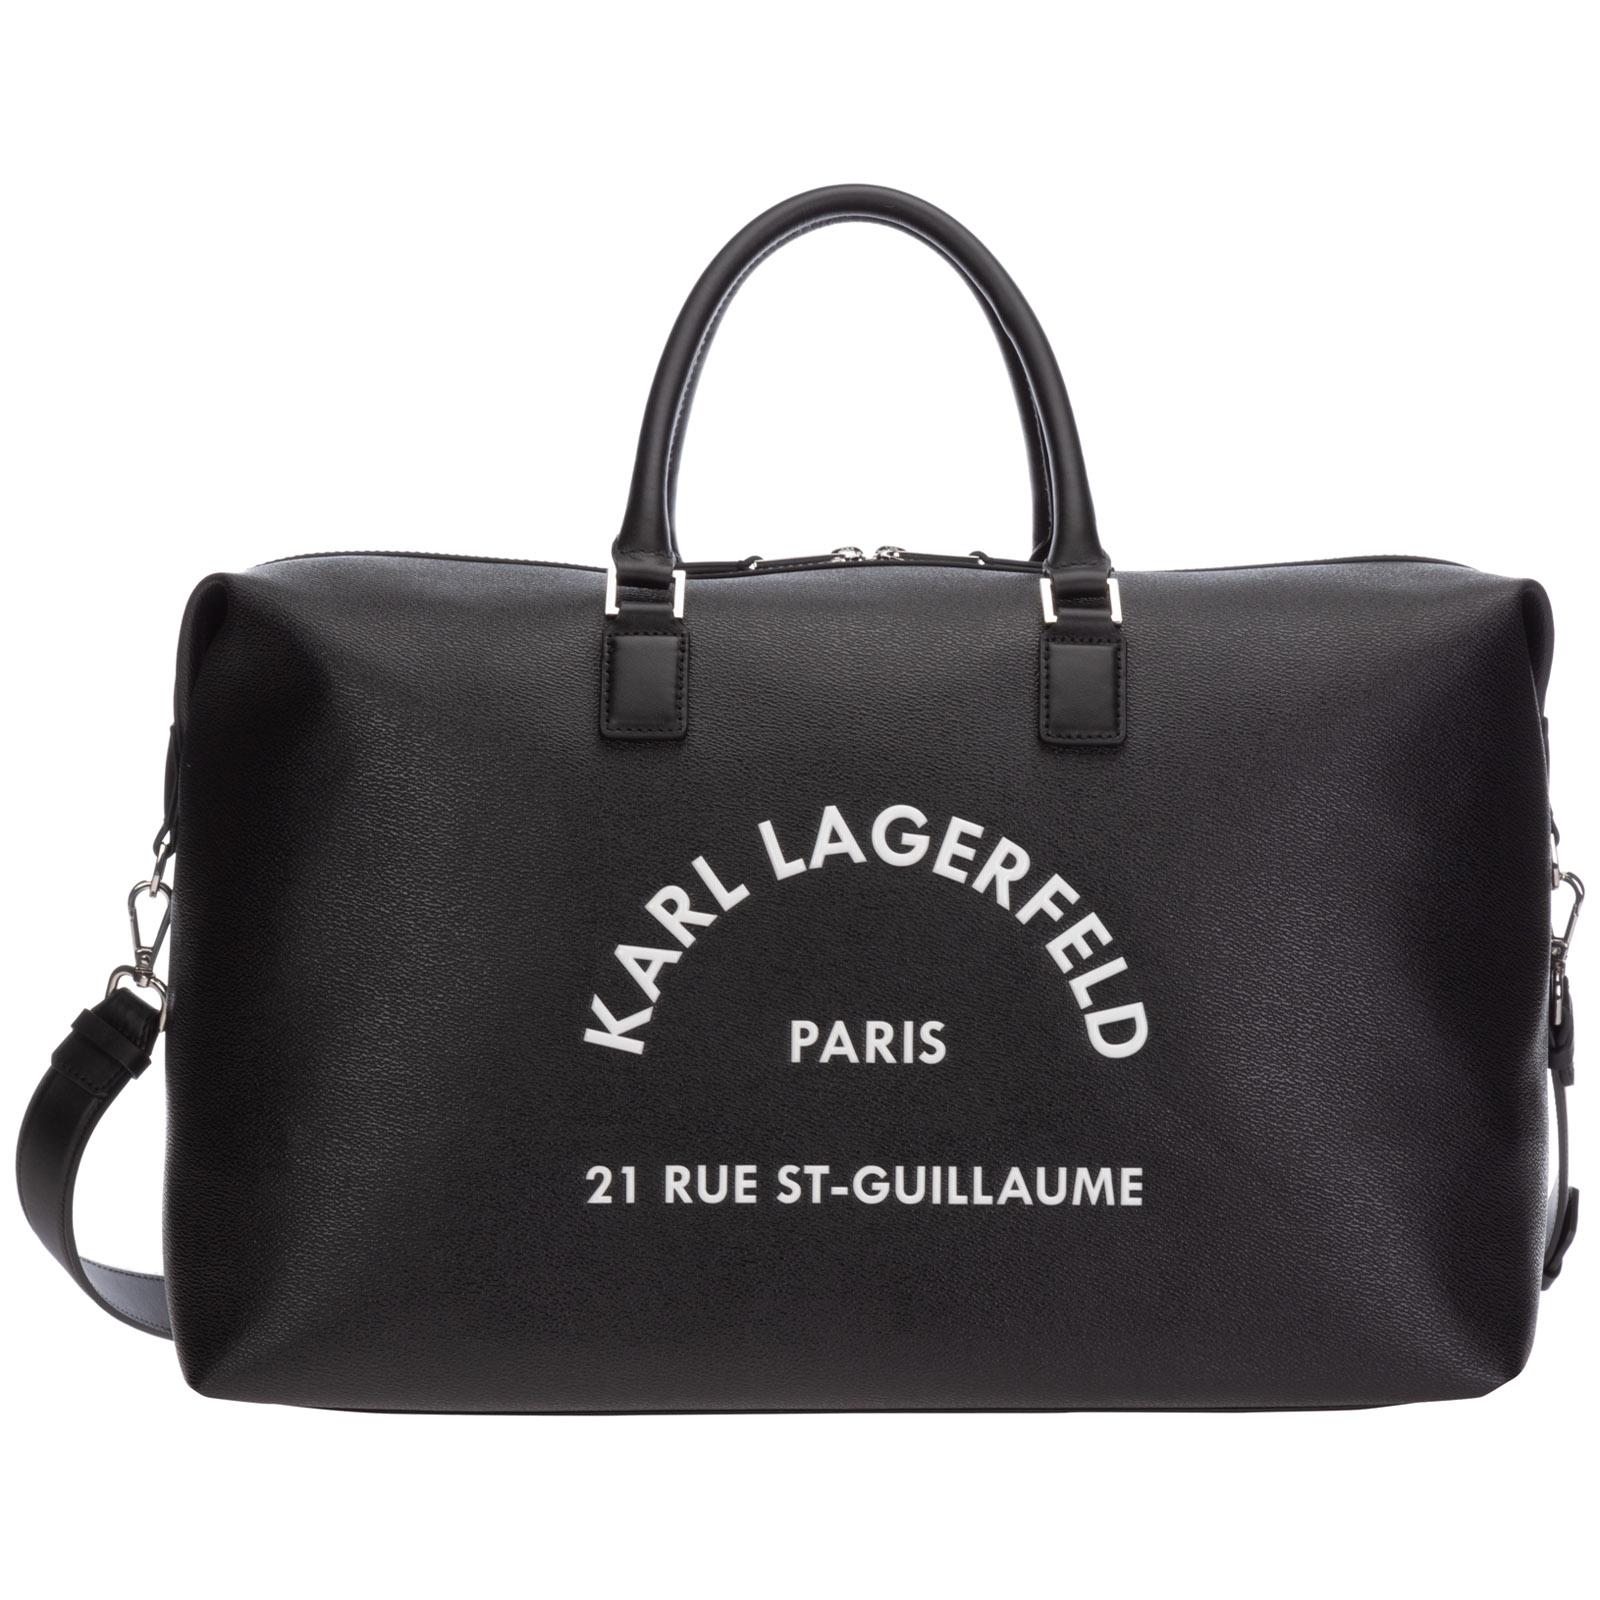 Karl Lagerfeld Cotton Rue St-guillaume Duffle Bag in Black - Lyst